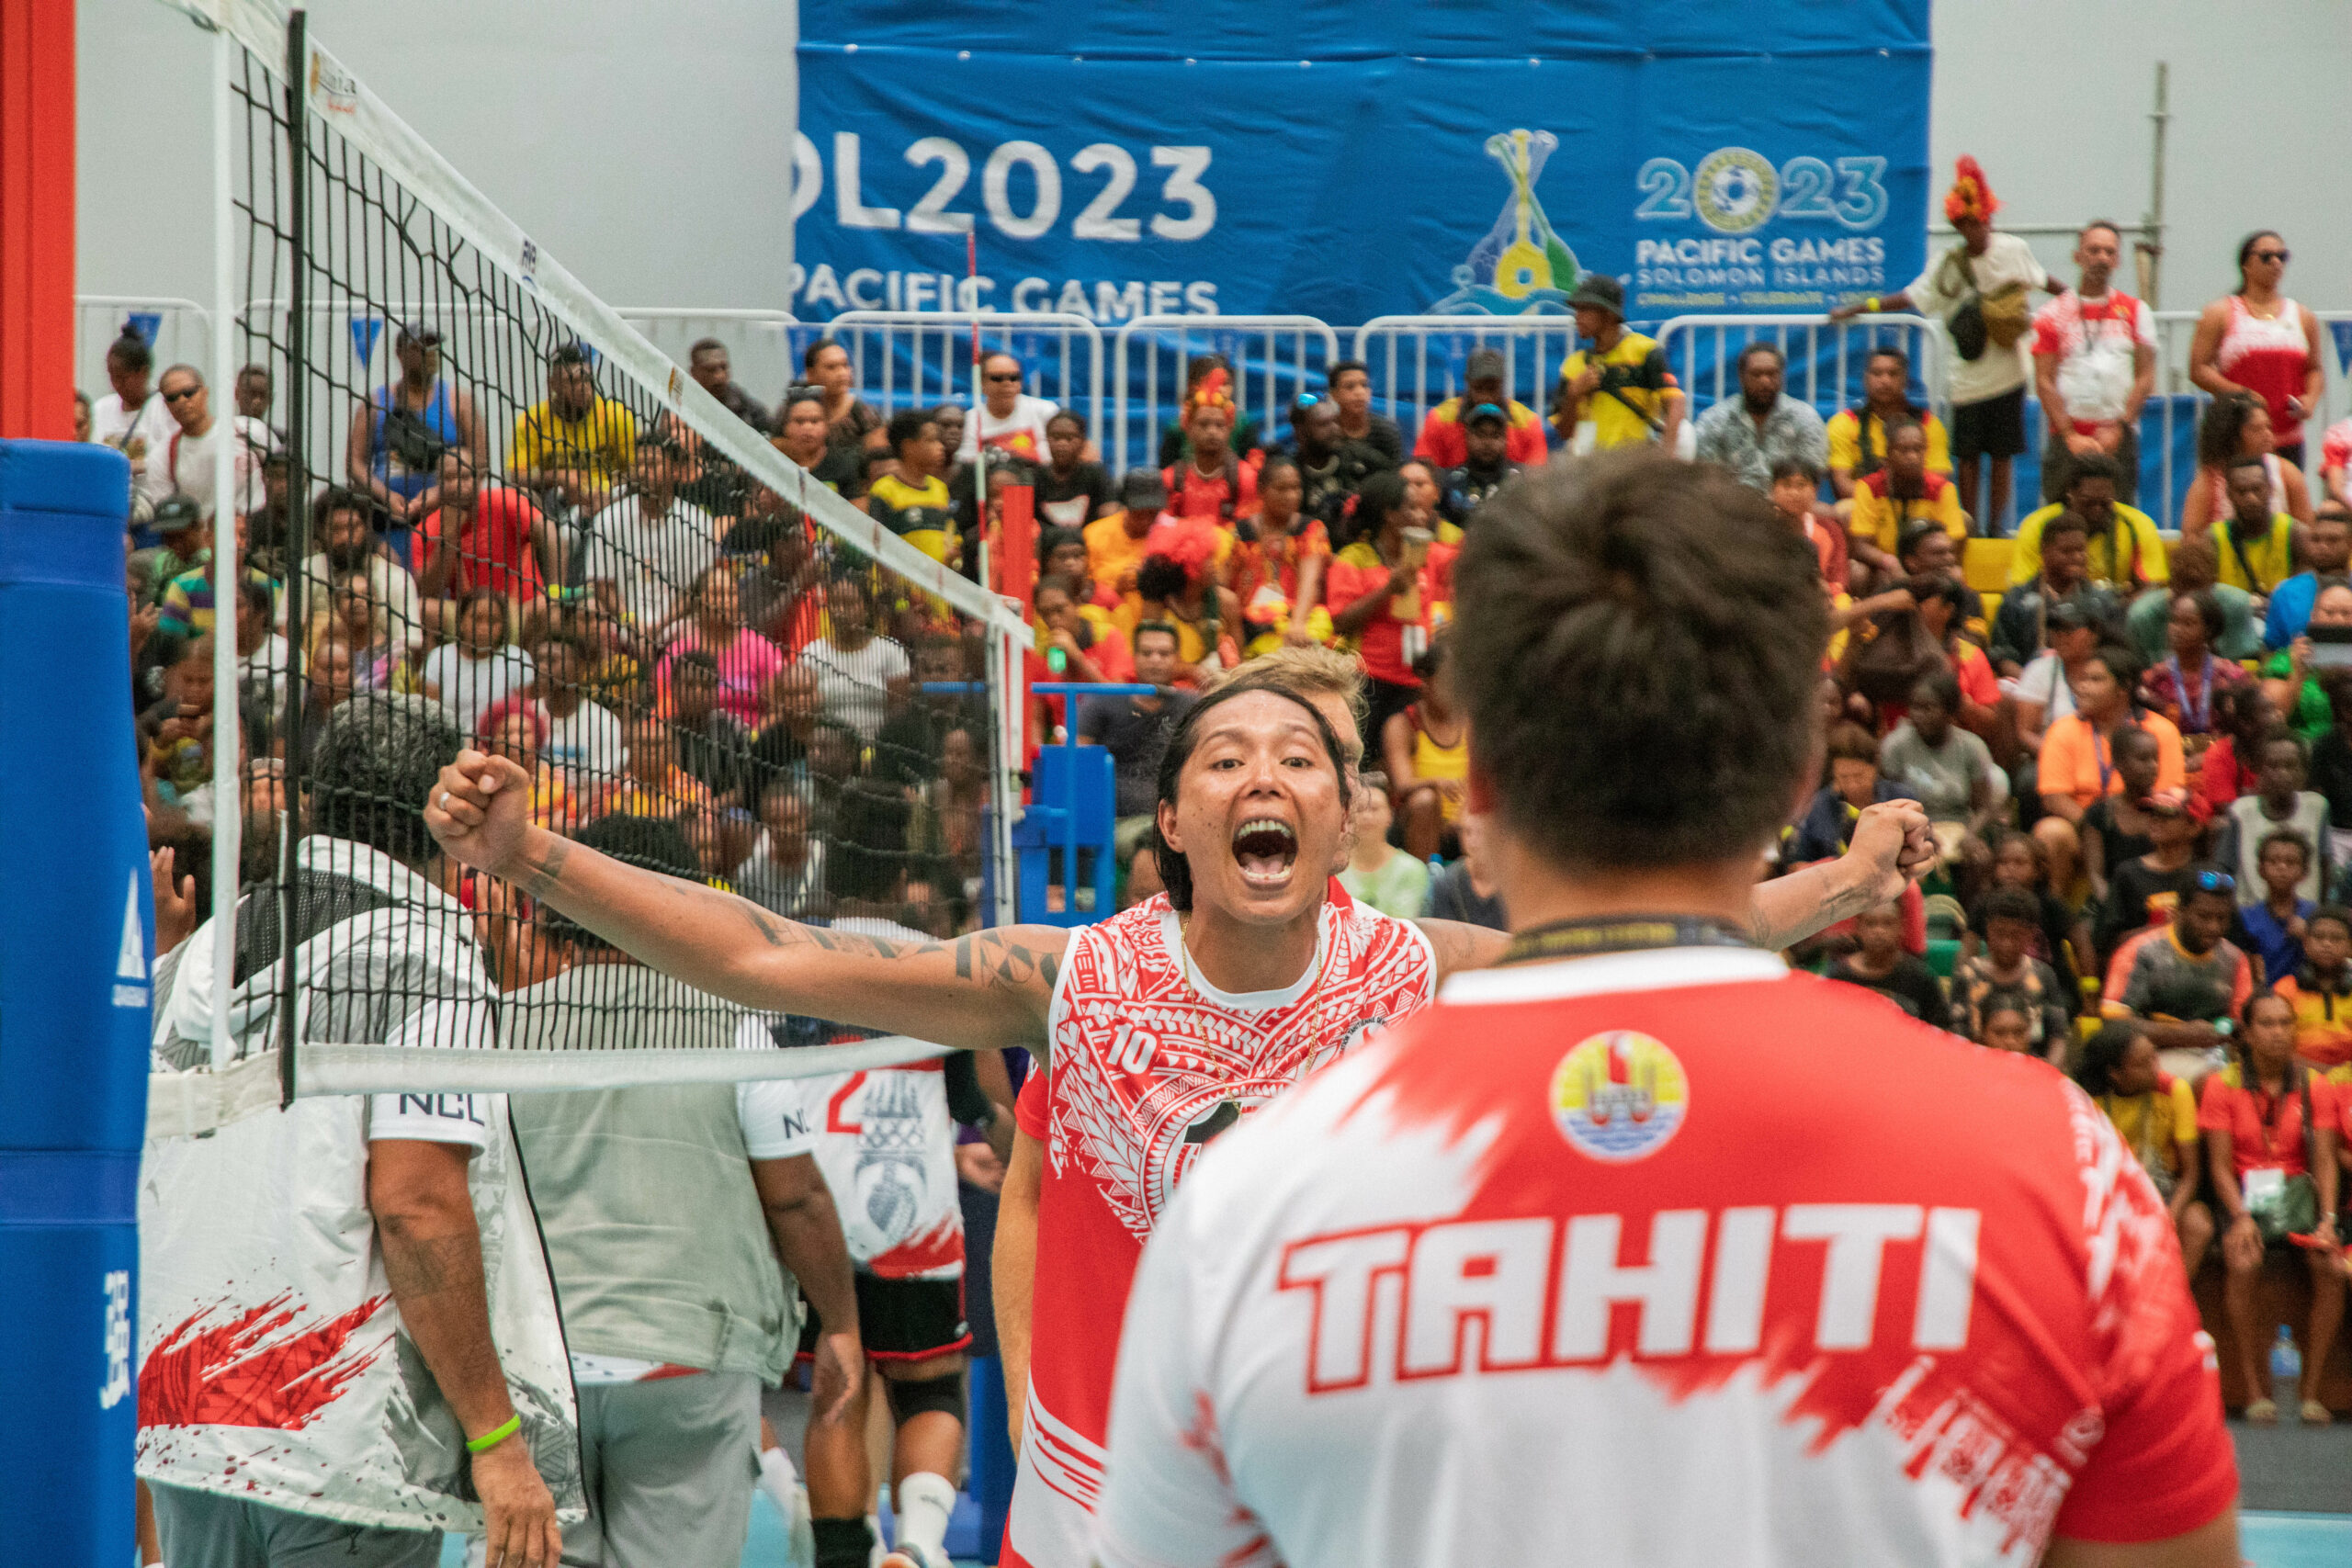 A female volleyball player celebrating victory